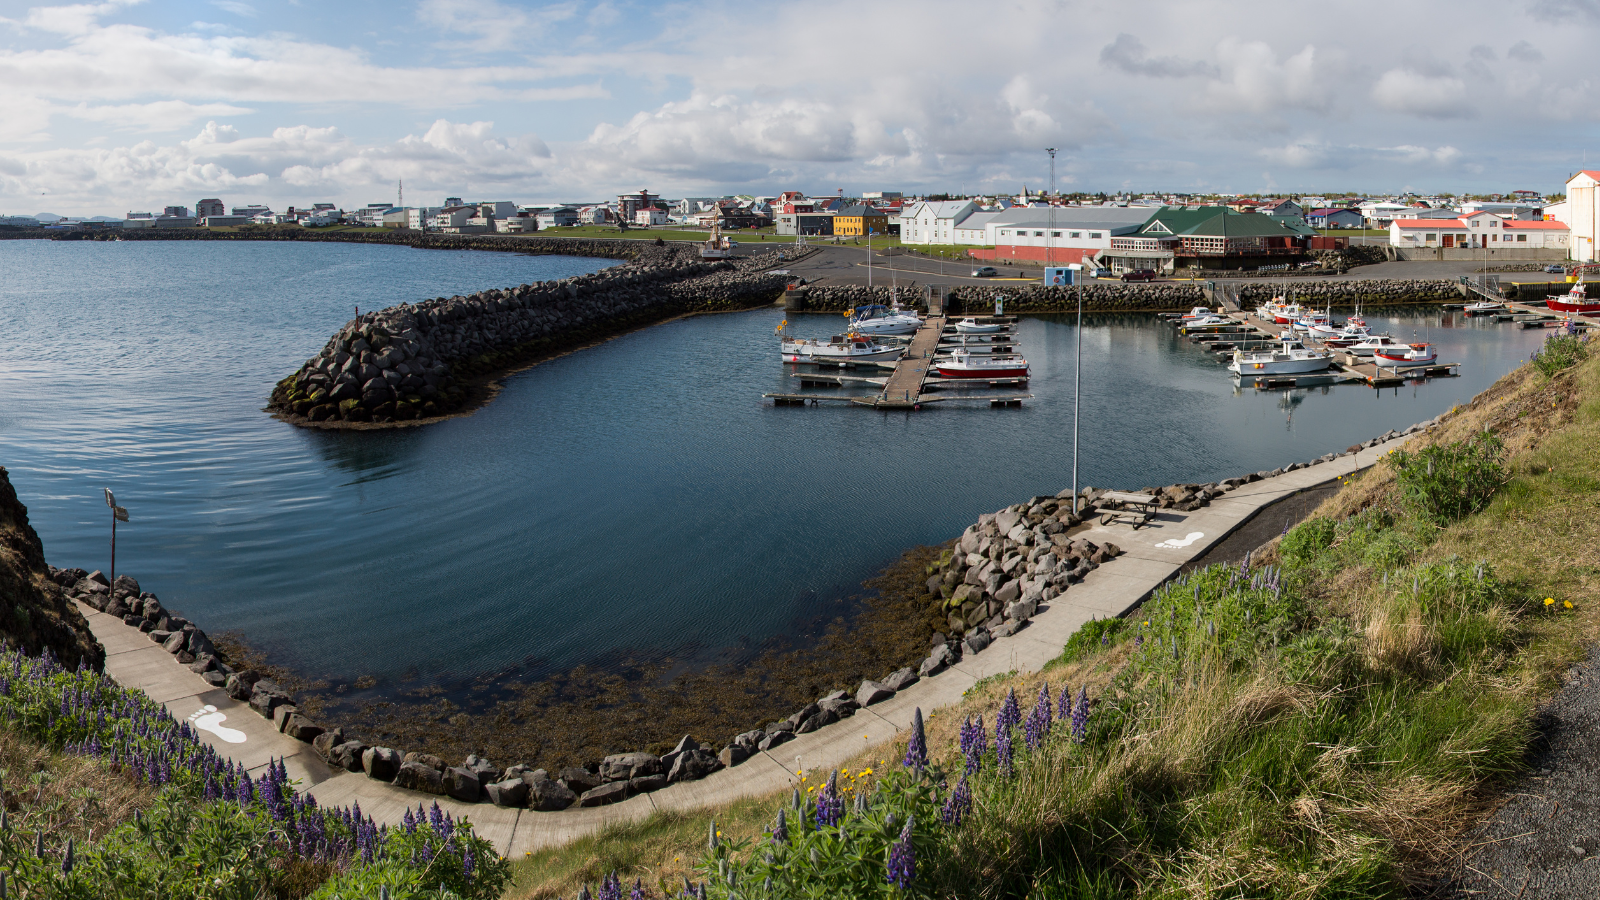  Keflavik harbour - home to restaurants and shops